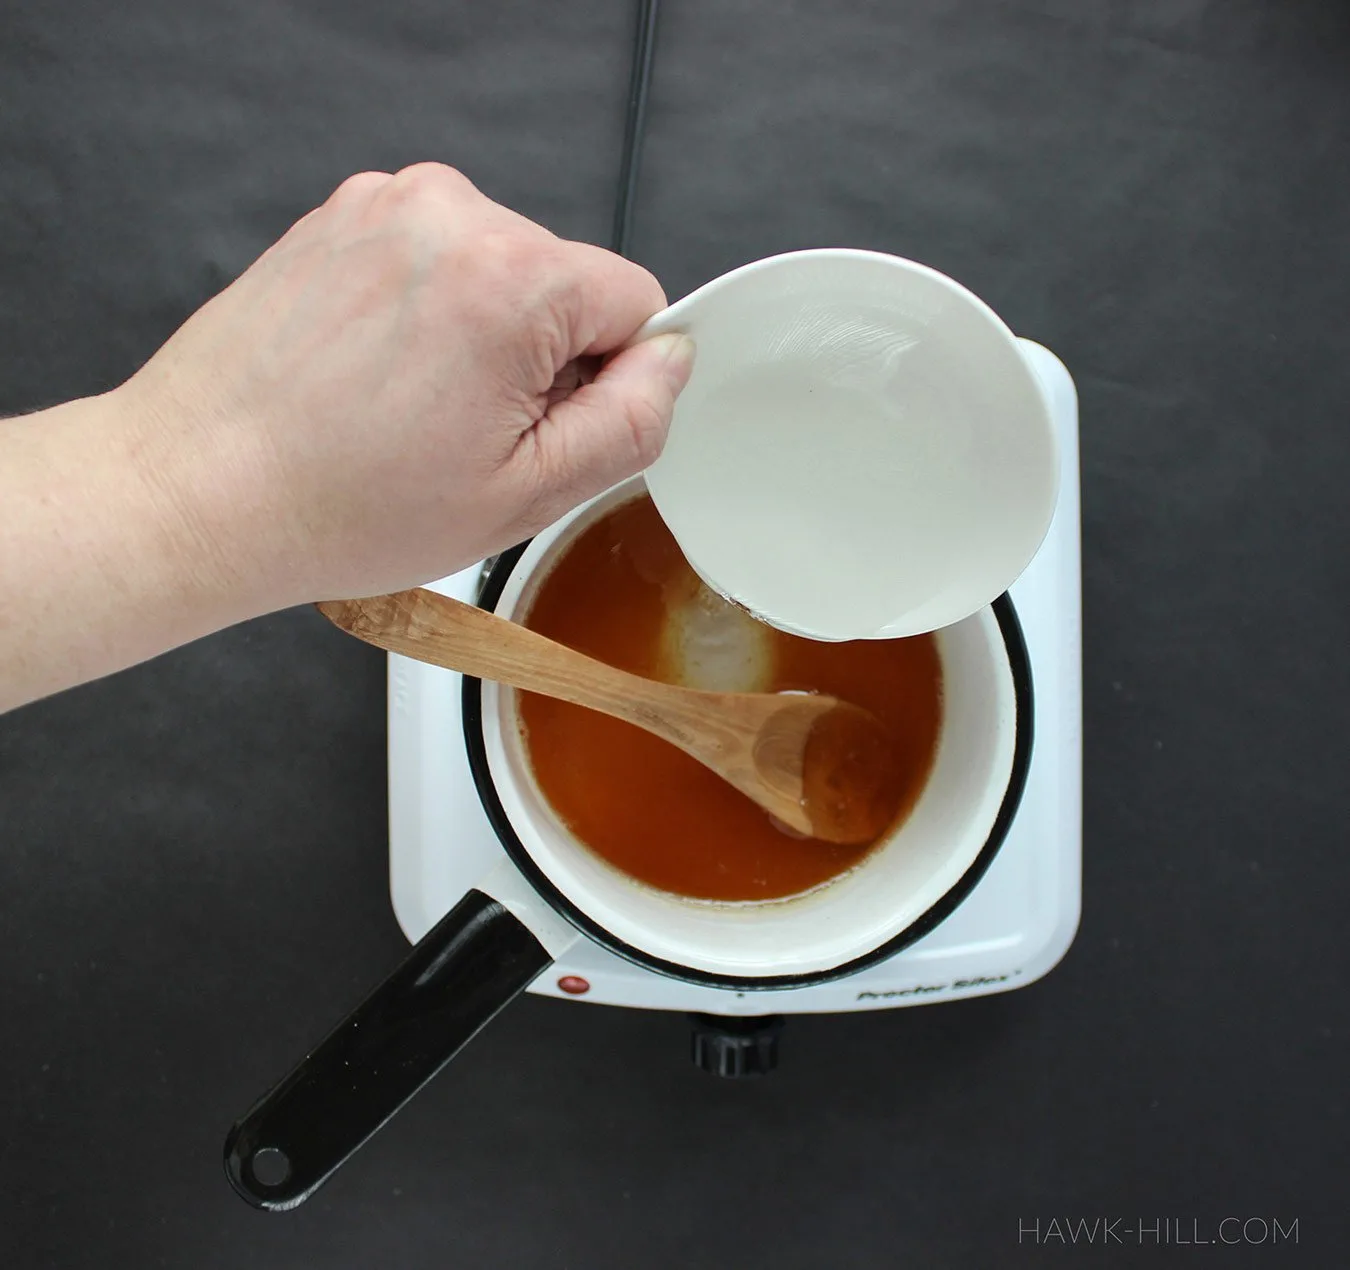 A hand pours a small amount of corn syrup into a pan of honey in order to prevent crystalization.